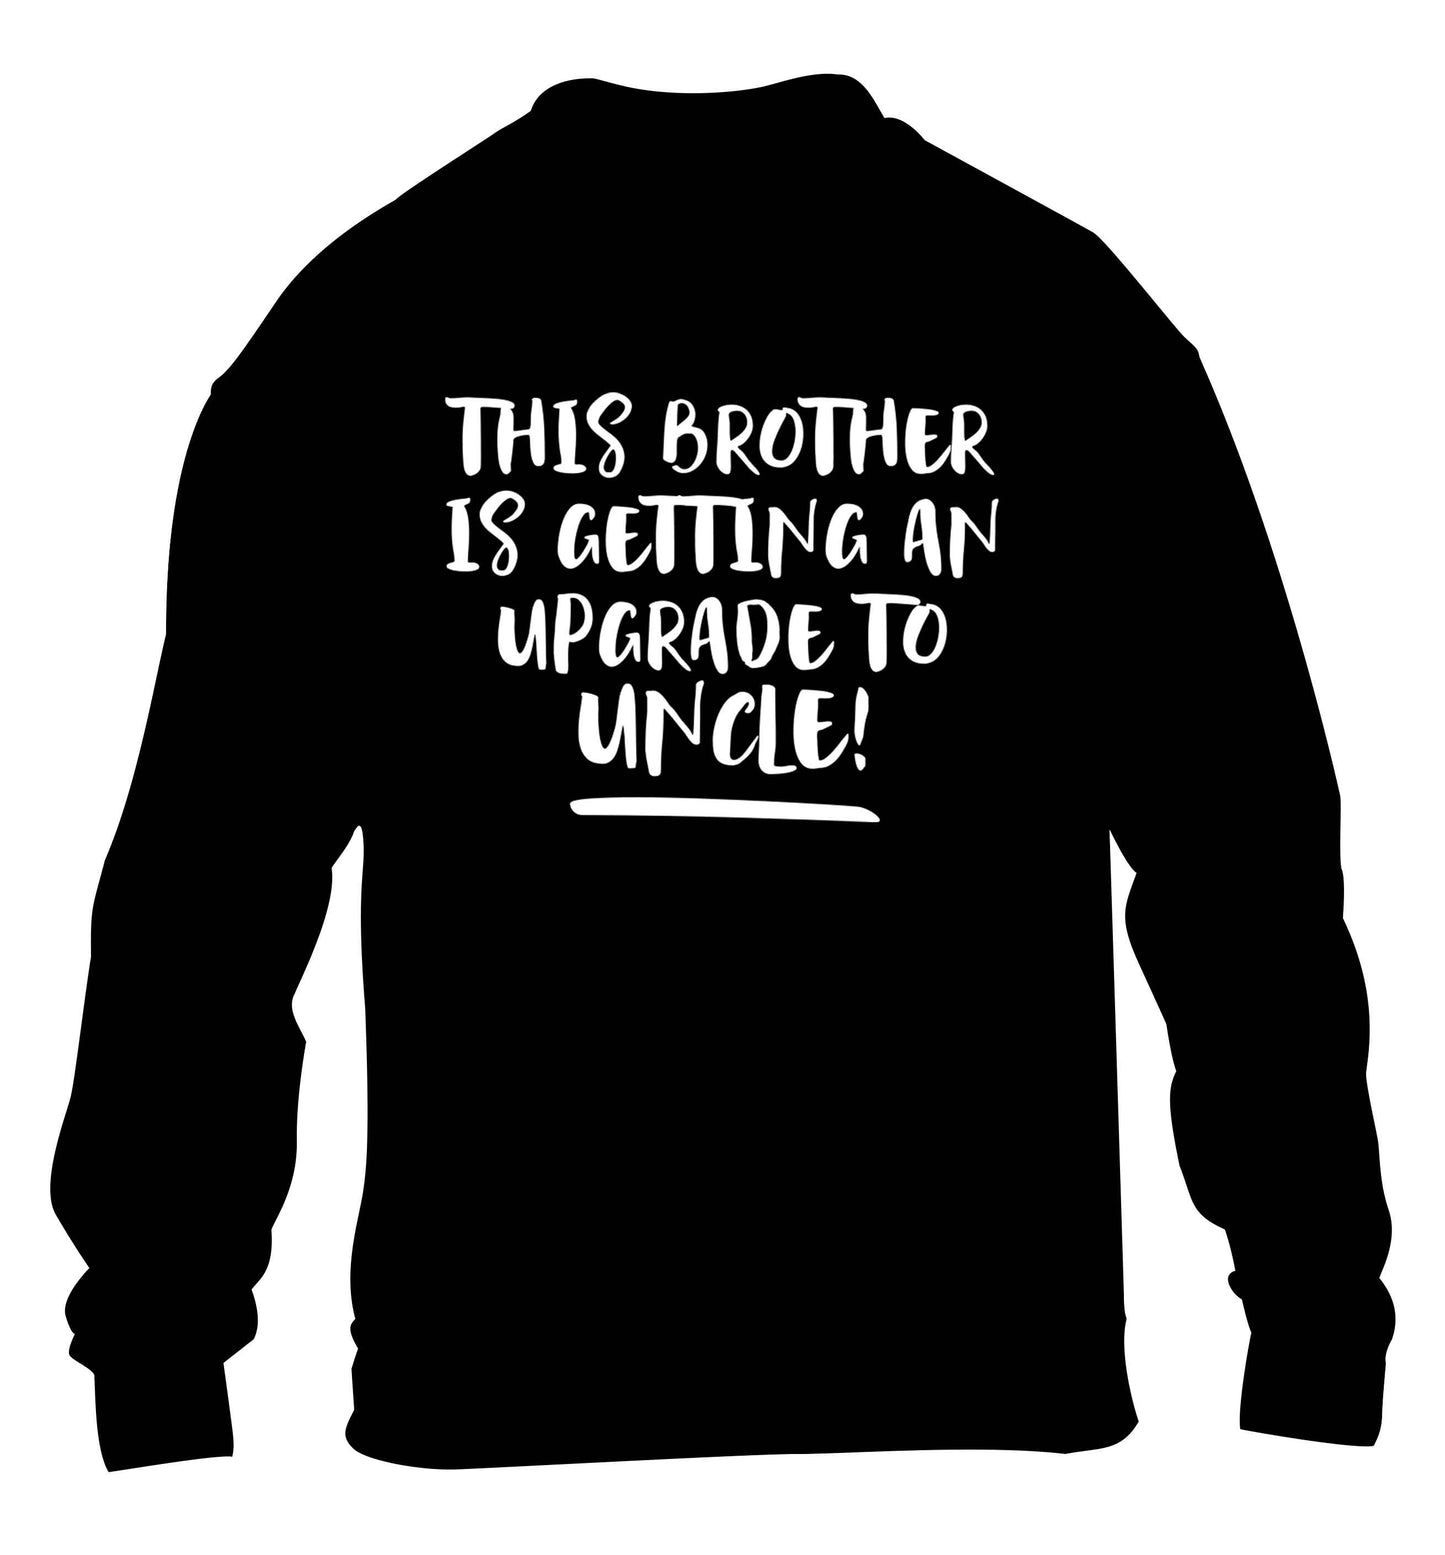 This brother is getting an upgrade to uncle! children's black sweater 12-13 Years